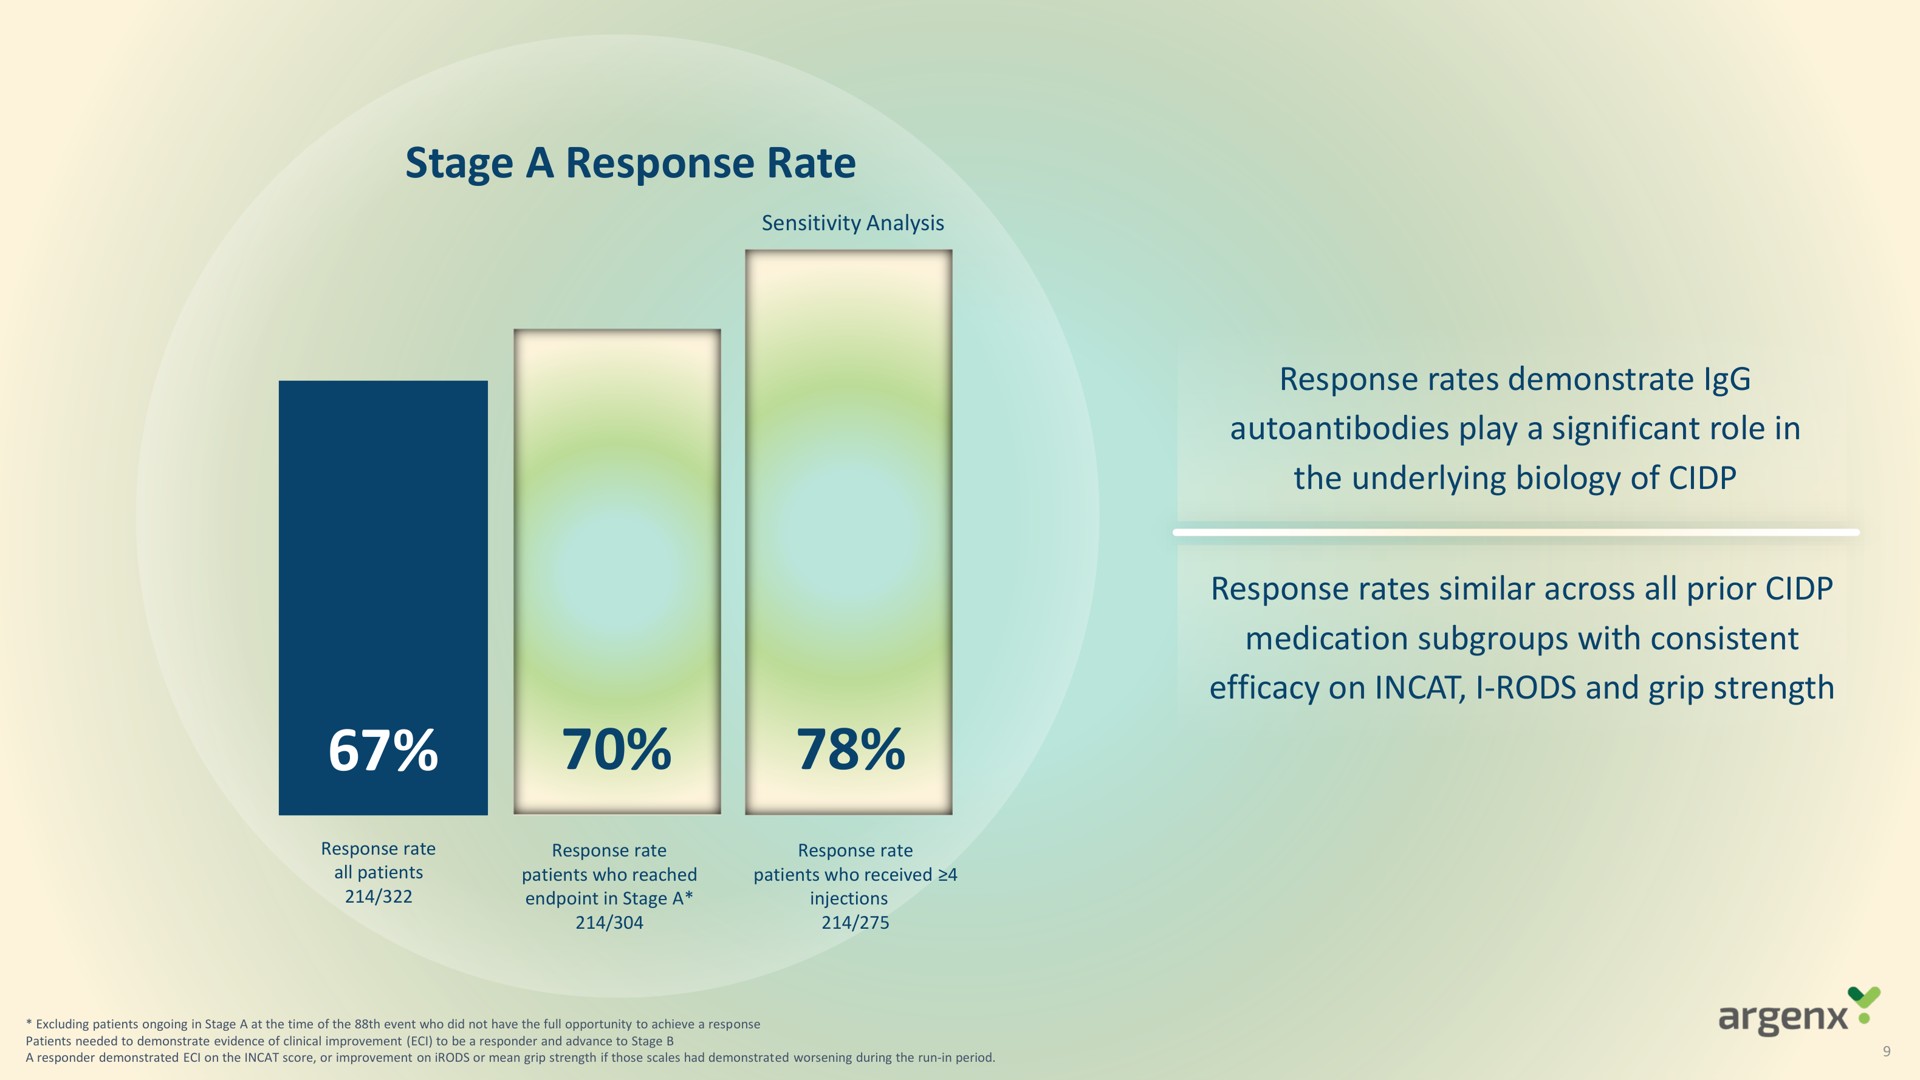 stage a response rate | argenx SE